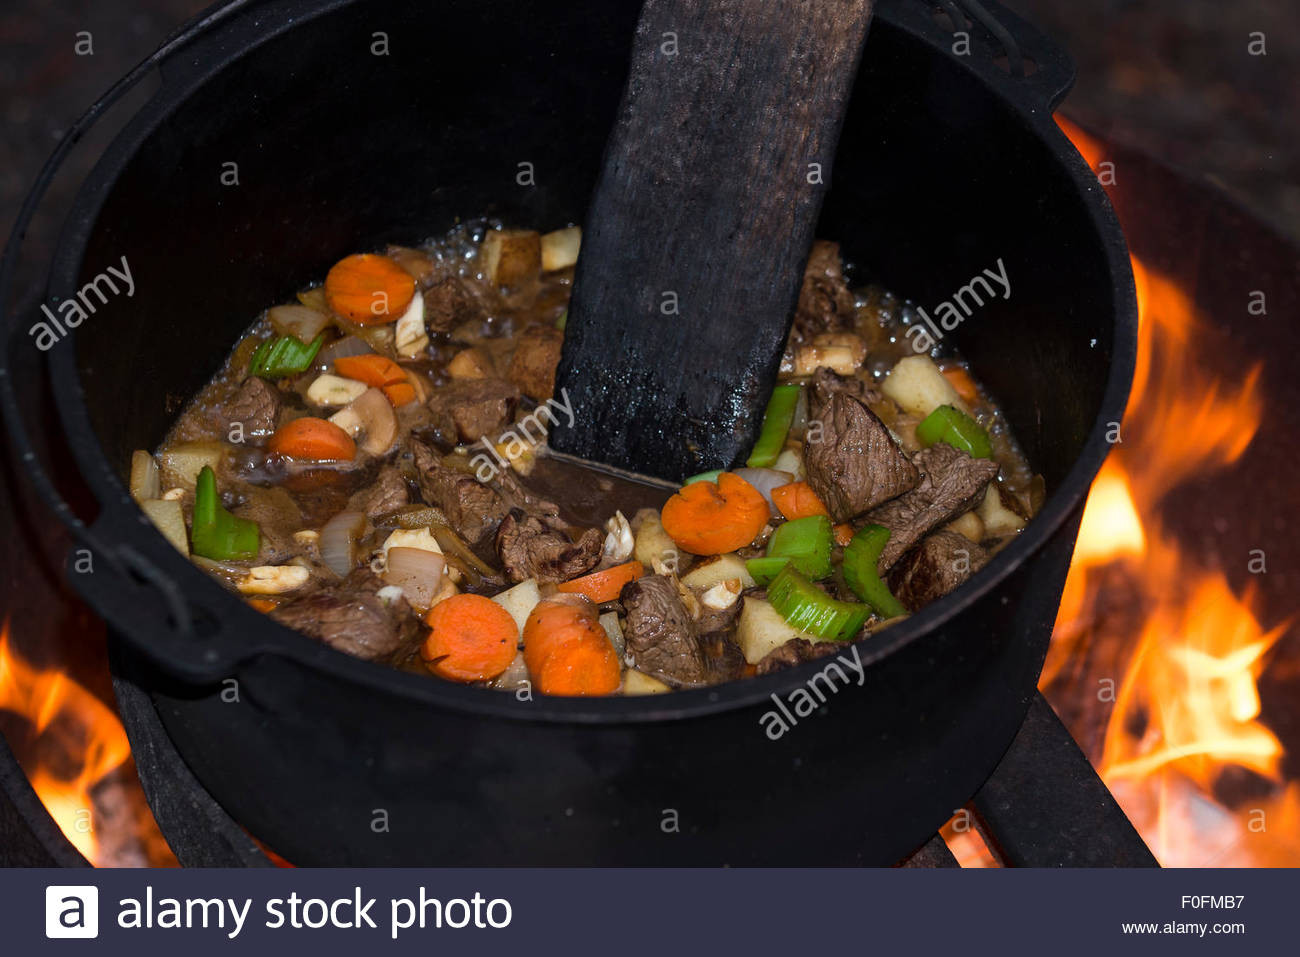 Dutch Oven Beef Stew Camping
 Beef stew cooking in a cast iron dutch oven over an open